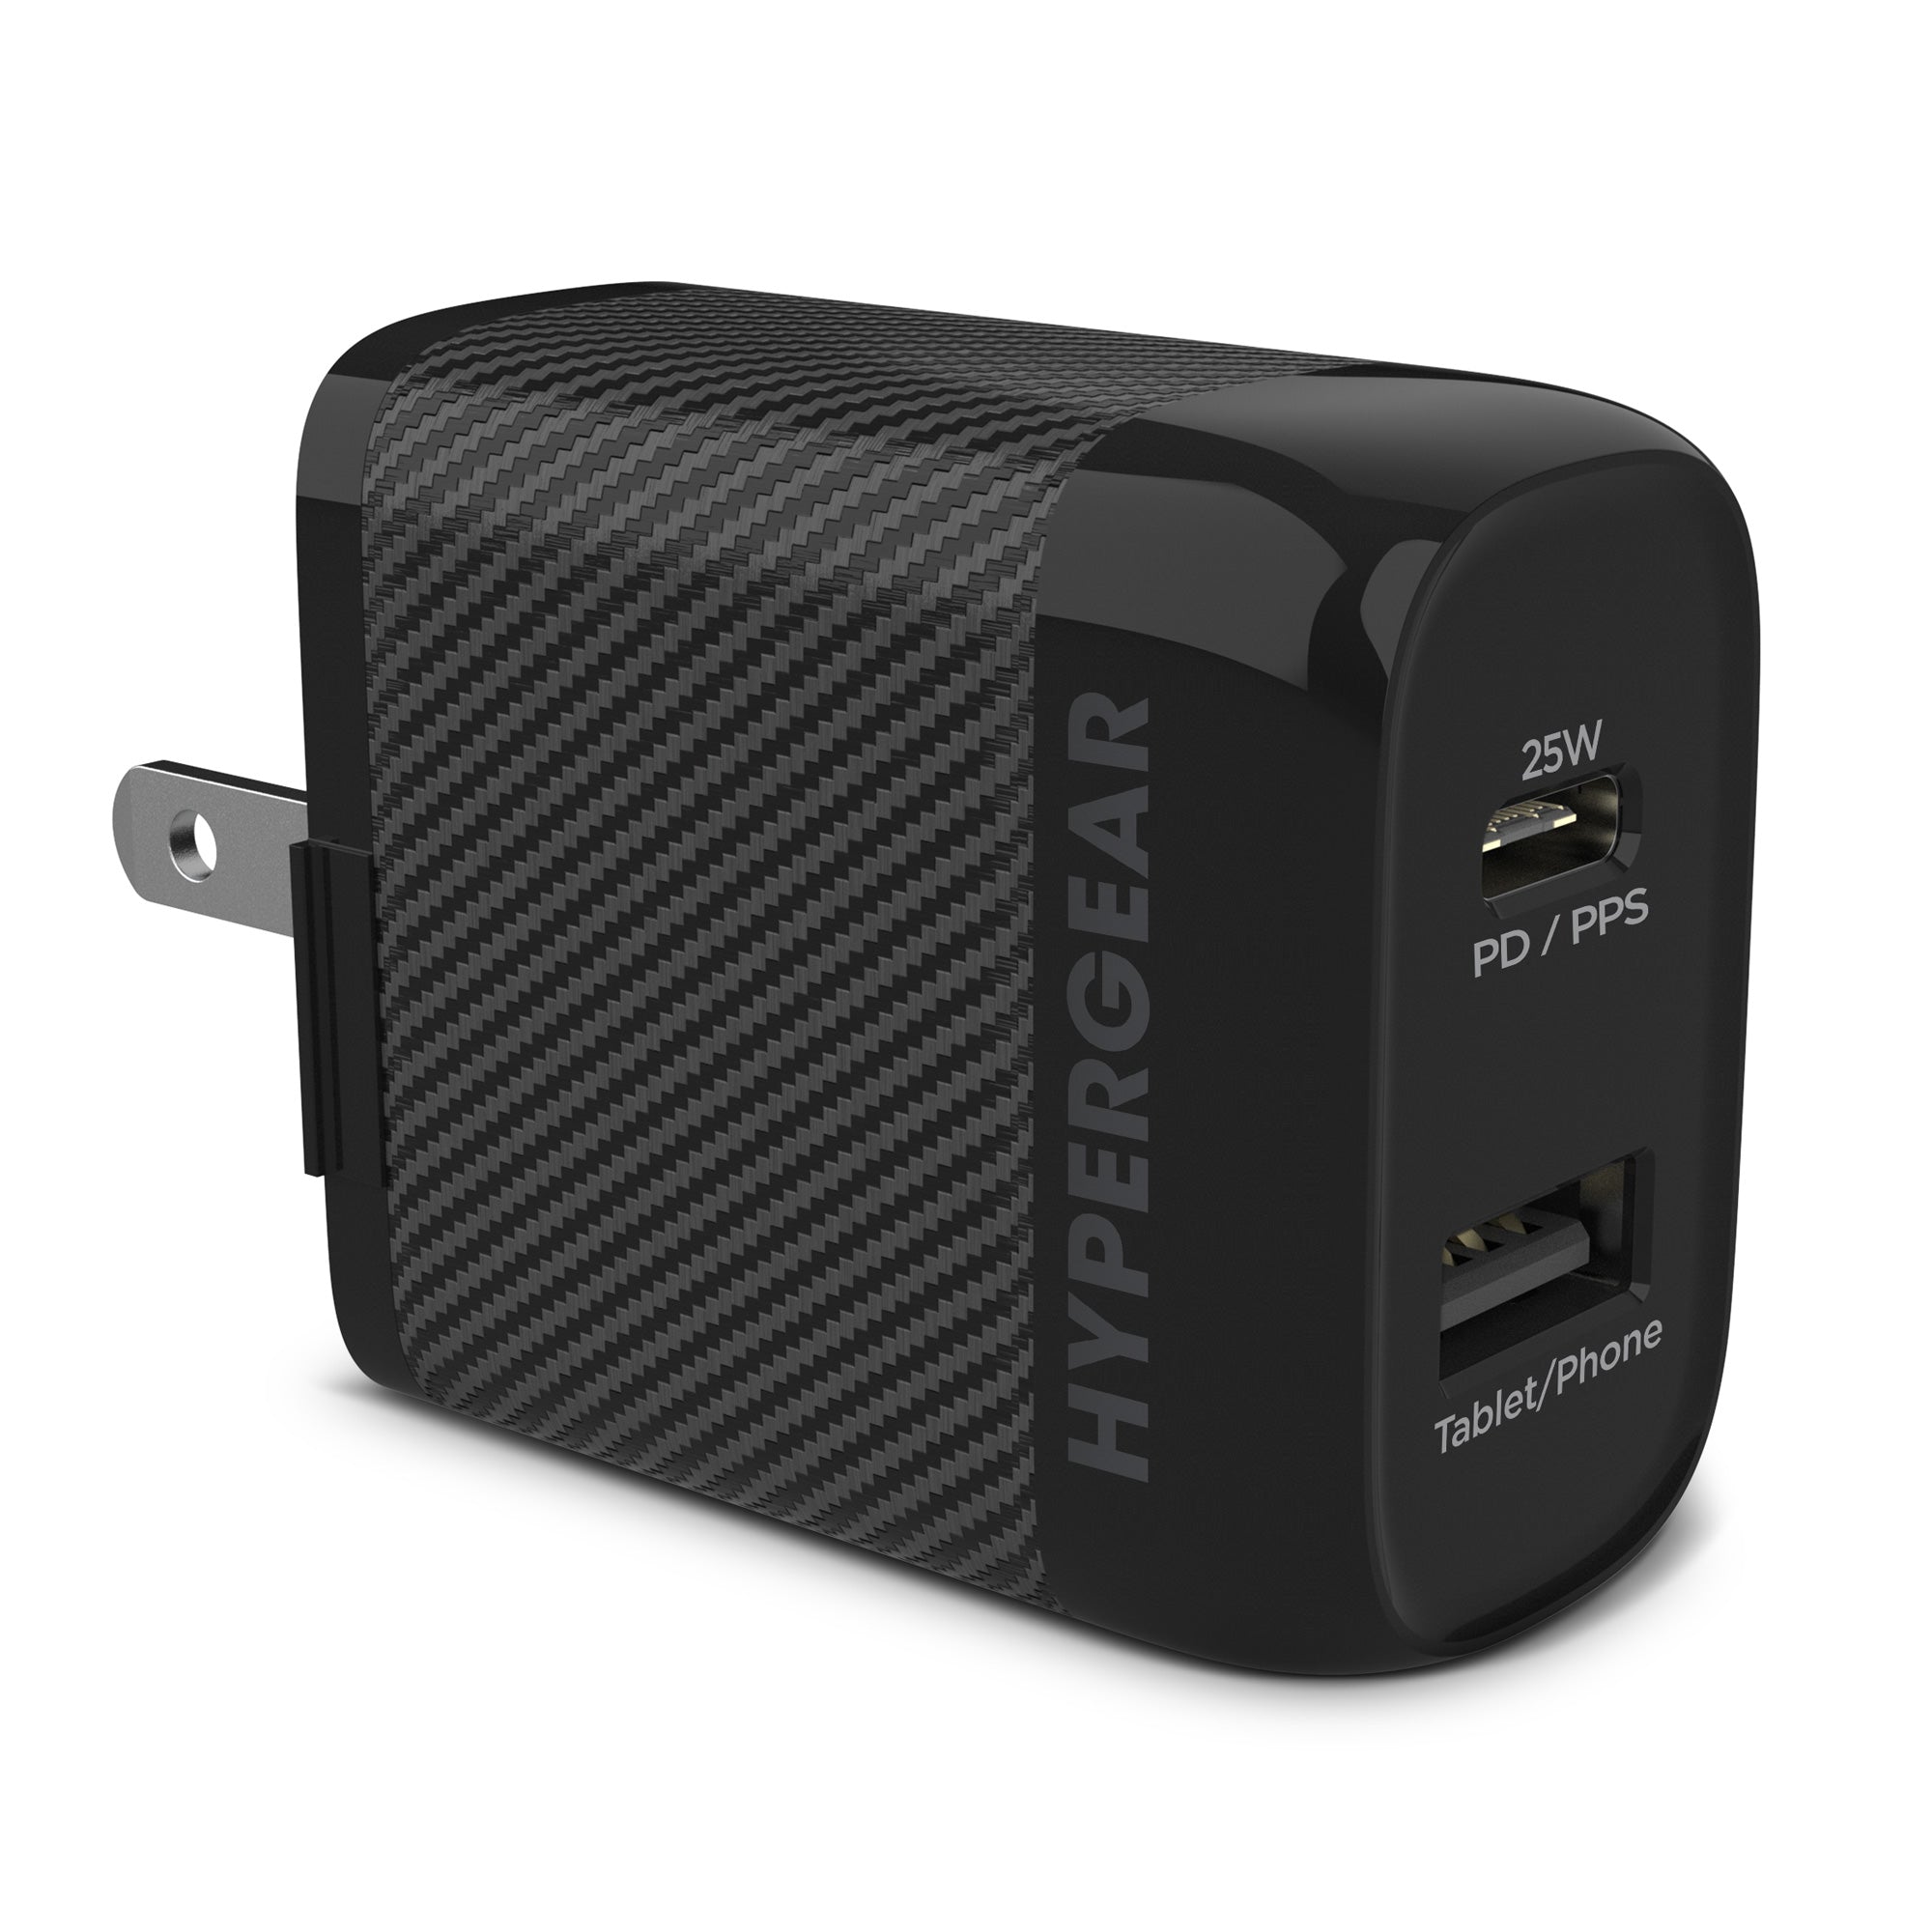 SpeedBoost 25W USB-C & 12W USB Wall Charger with PD/PPS | Black